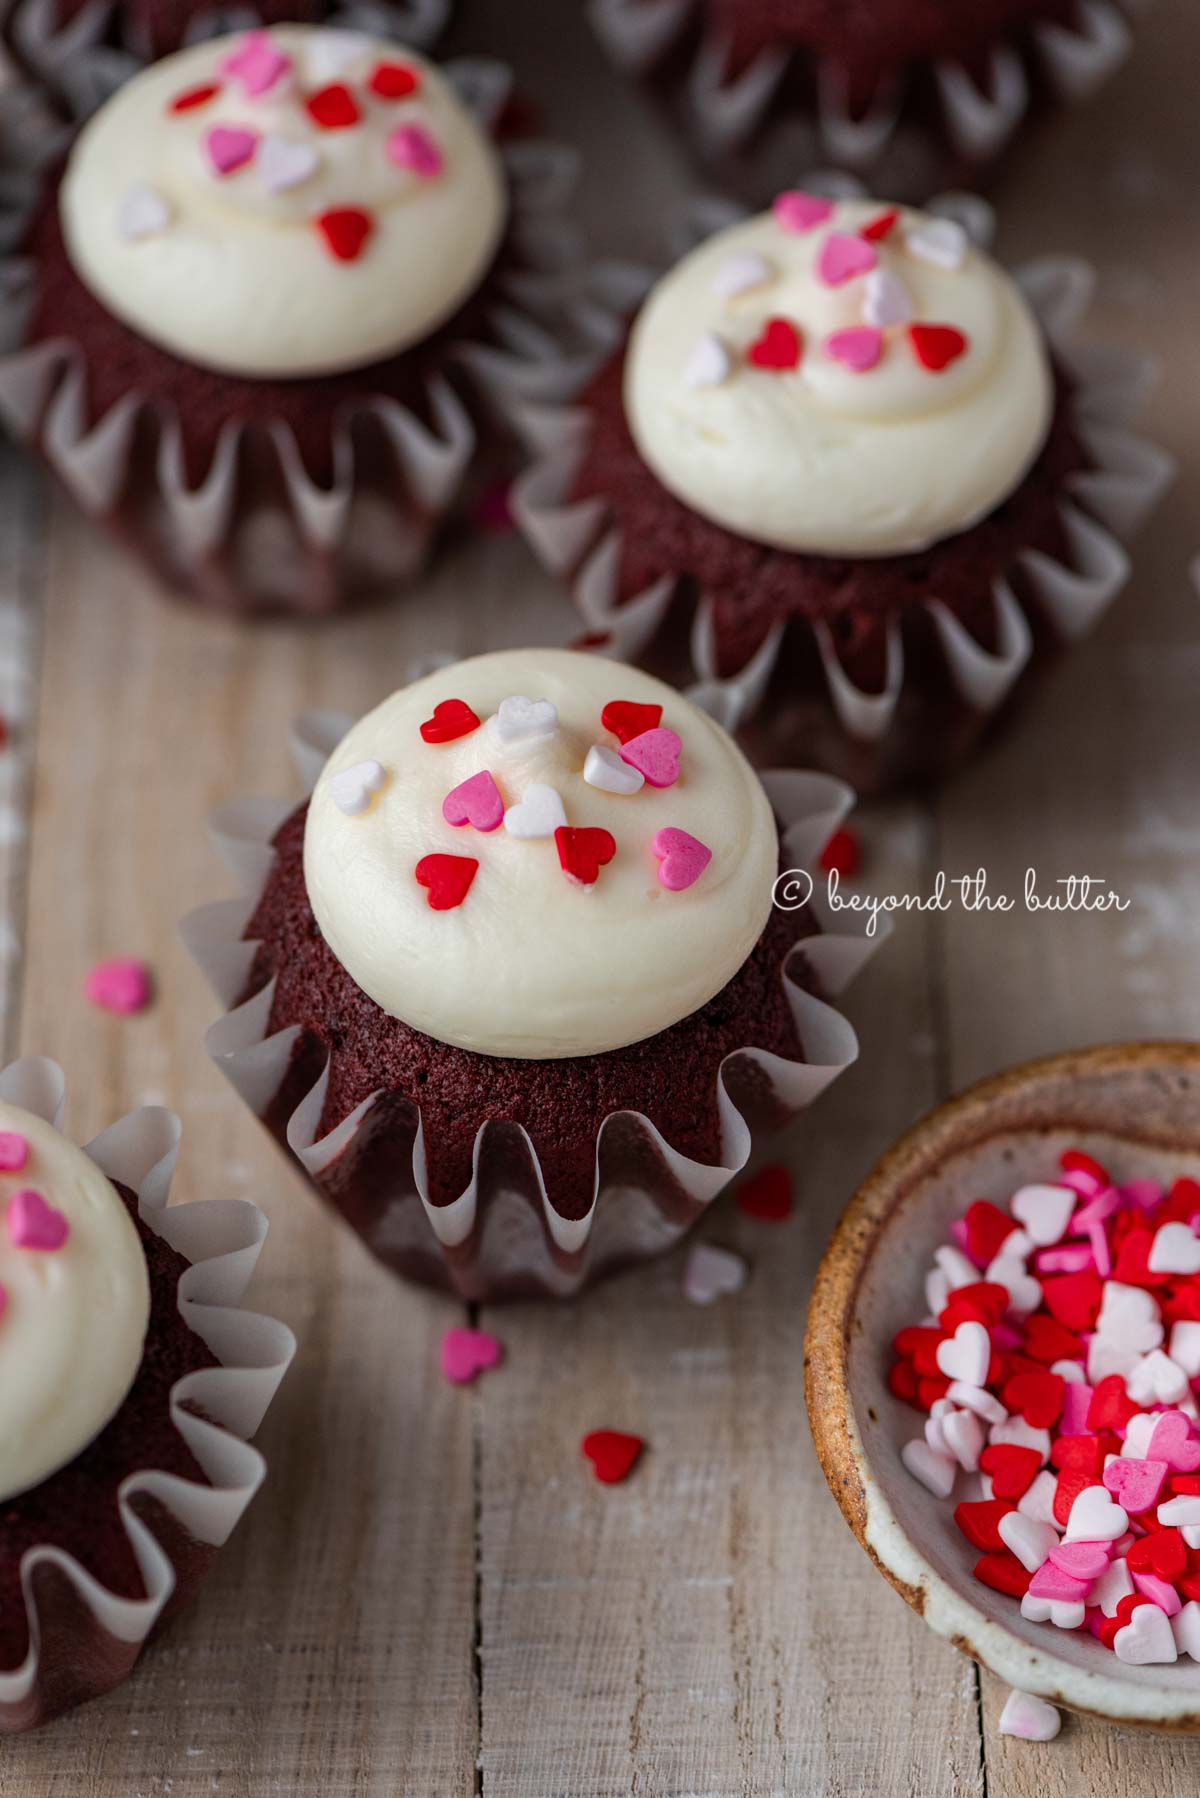 Homemade red velvet cupcakes with cream cheese frosting topped with heart sprinkles on a light wood background | All images © Beyond the Butter®